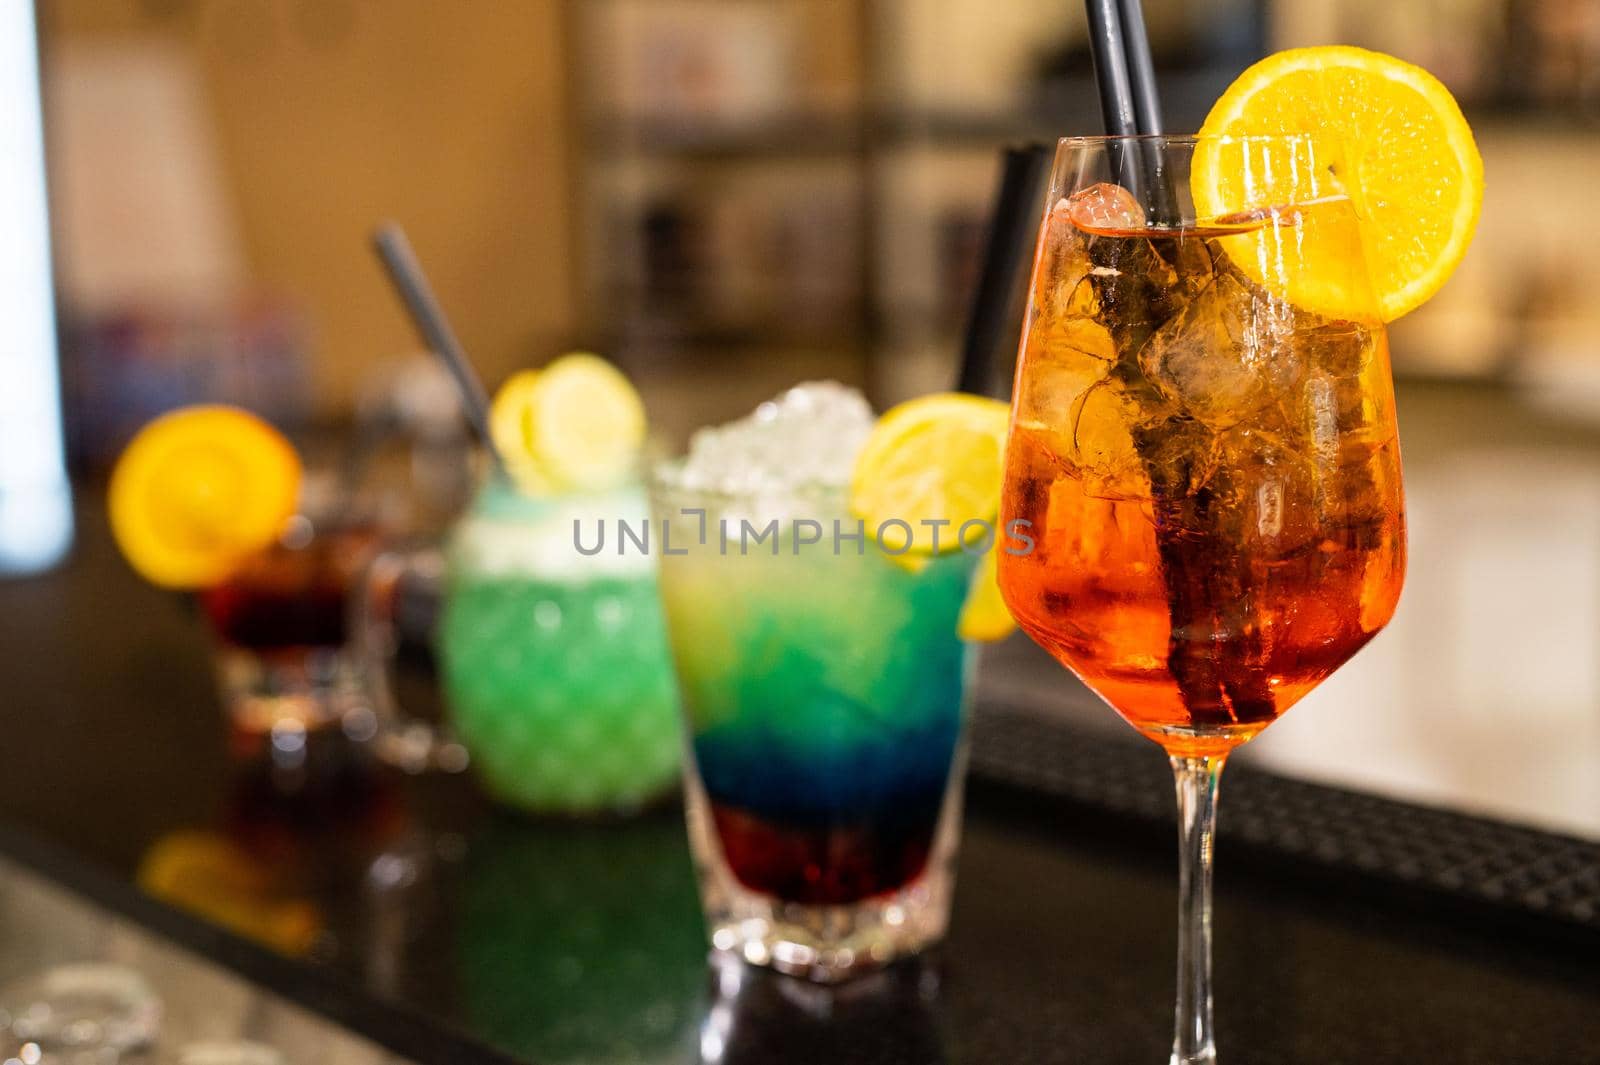 composition of various coktails on the counter by carfedeph